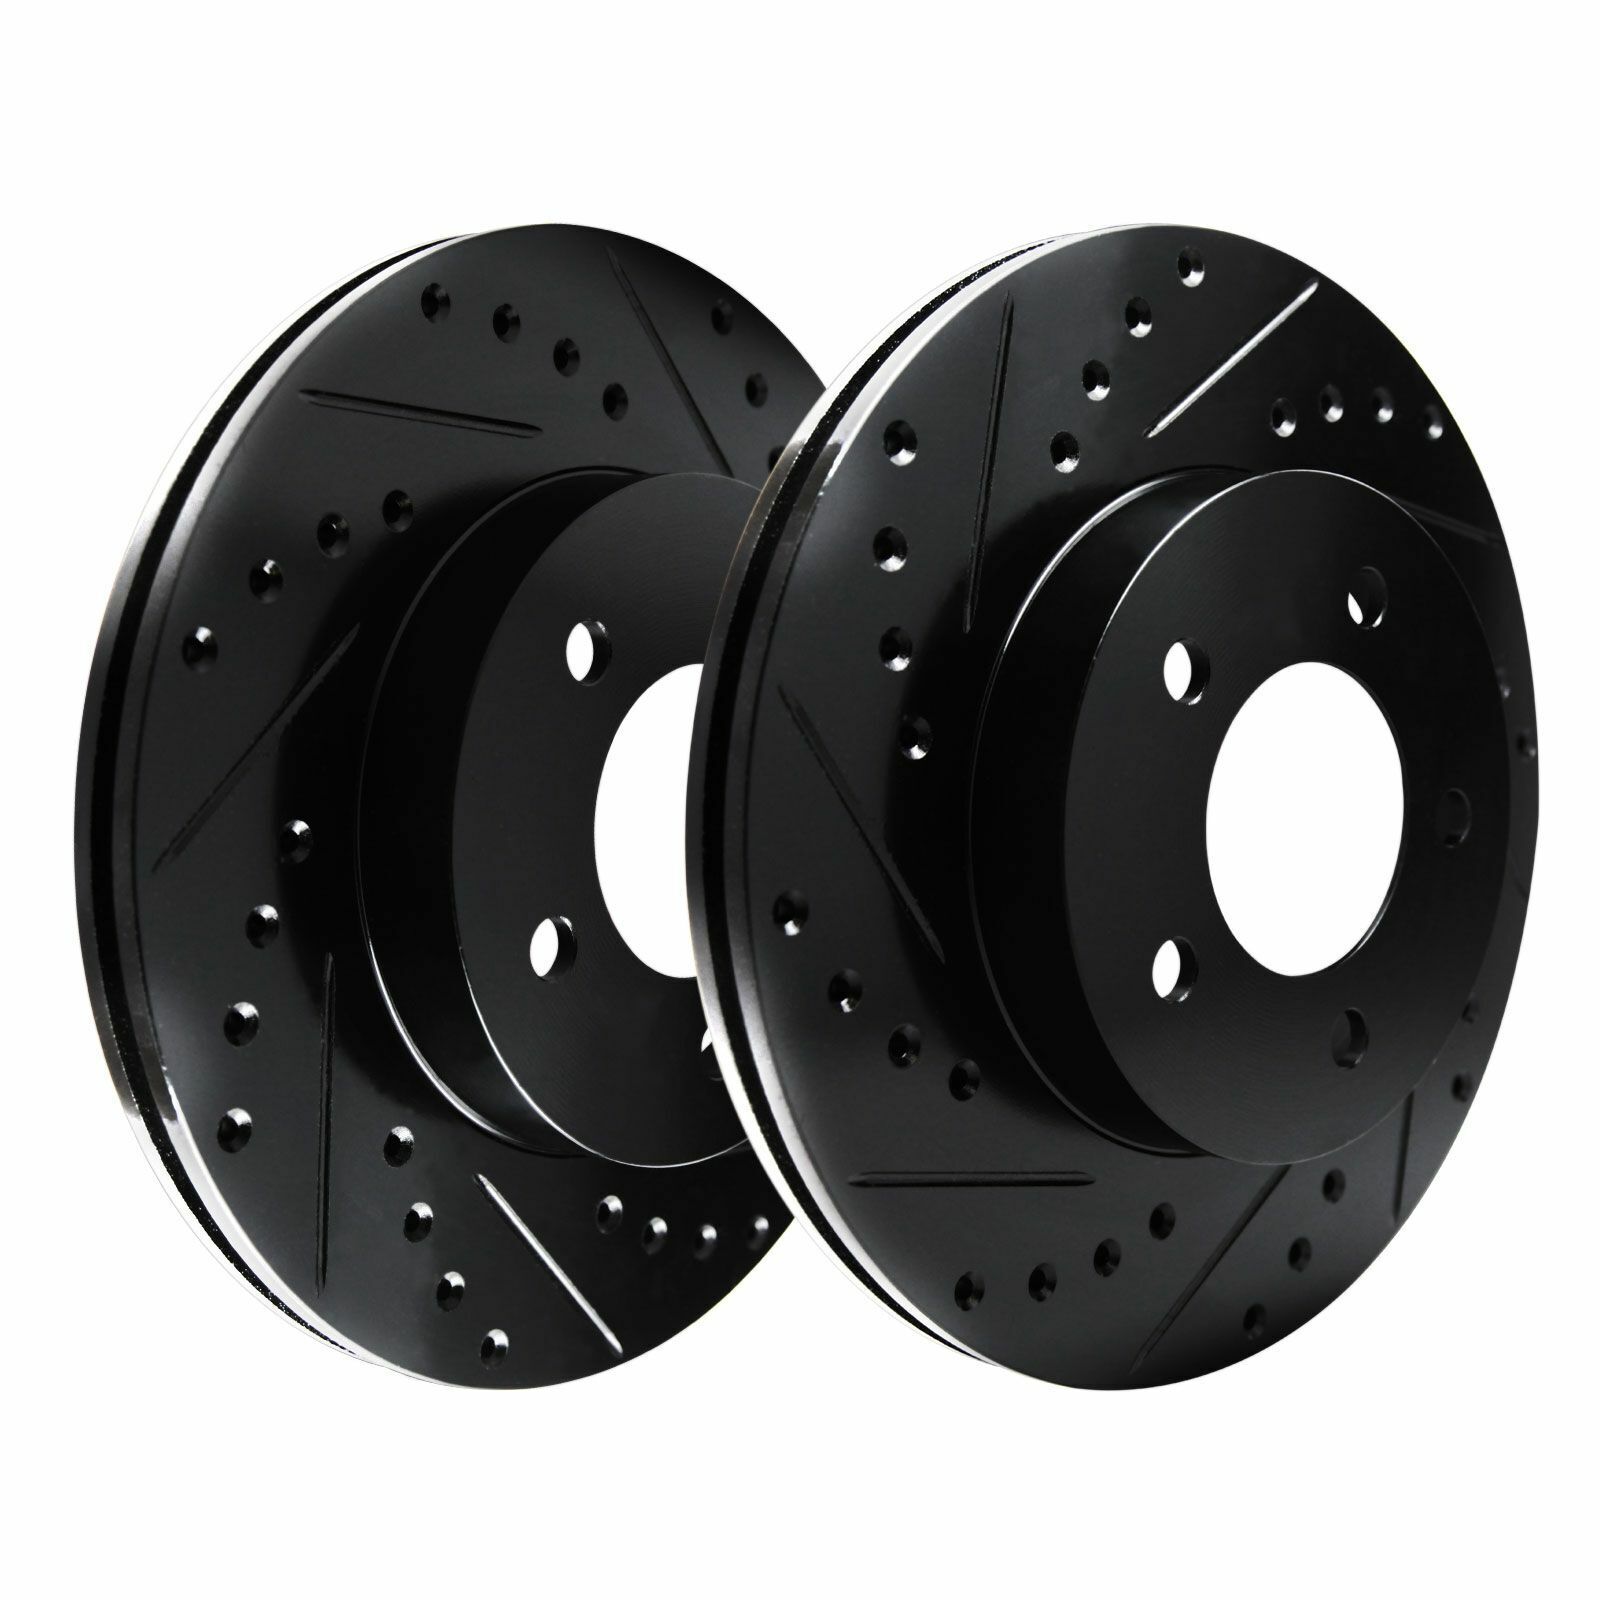 [2 FRONTS] Black Hart *DRILLED & SLOTTED* Disc Brake Rotors F137